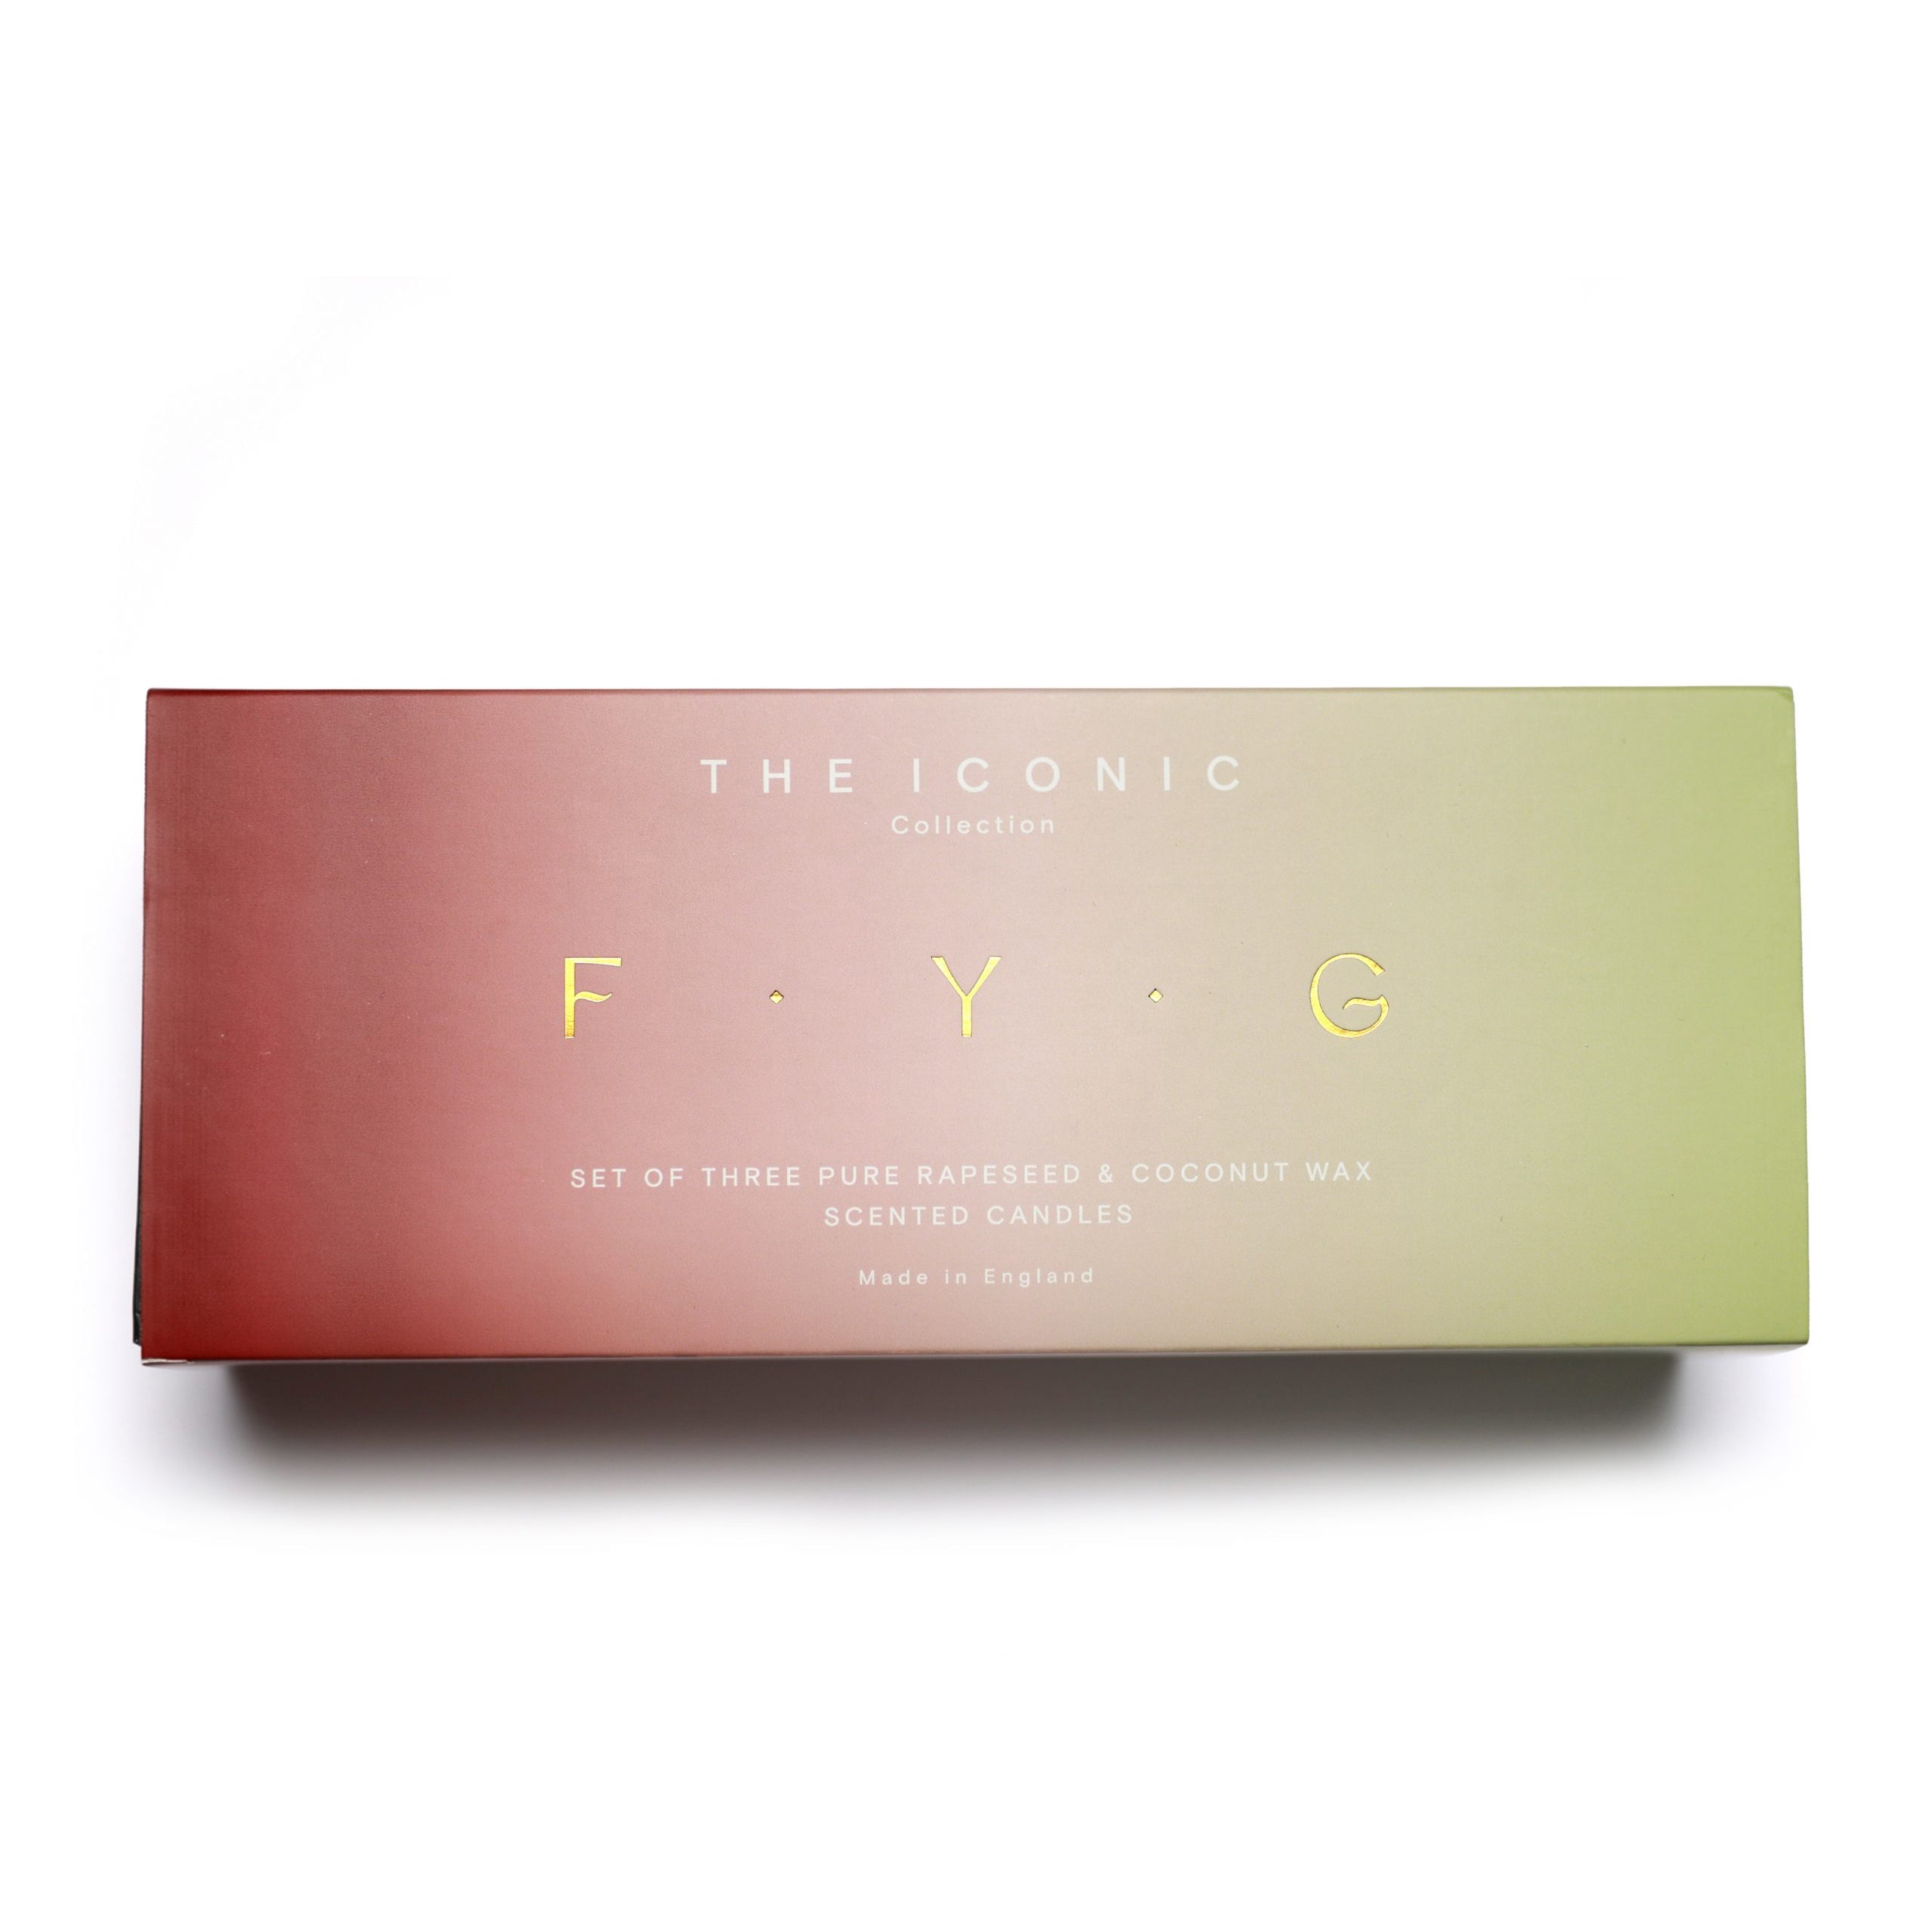 FYG The Iconic Collection Candle Gift Set of 3